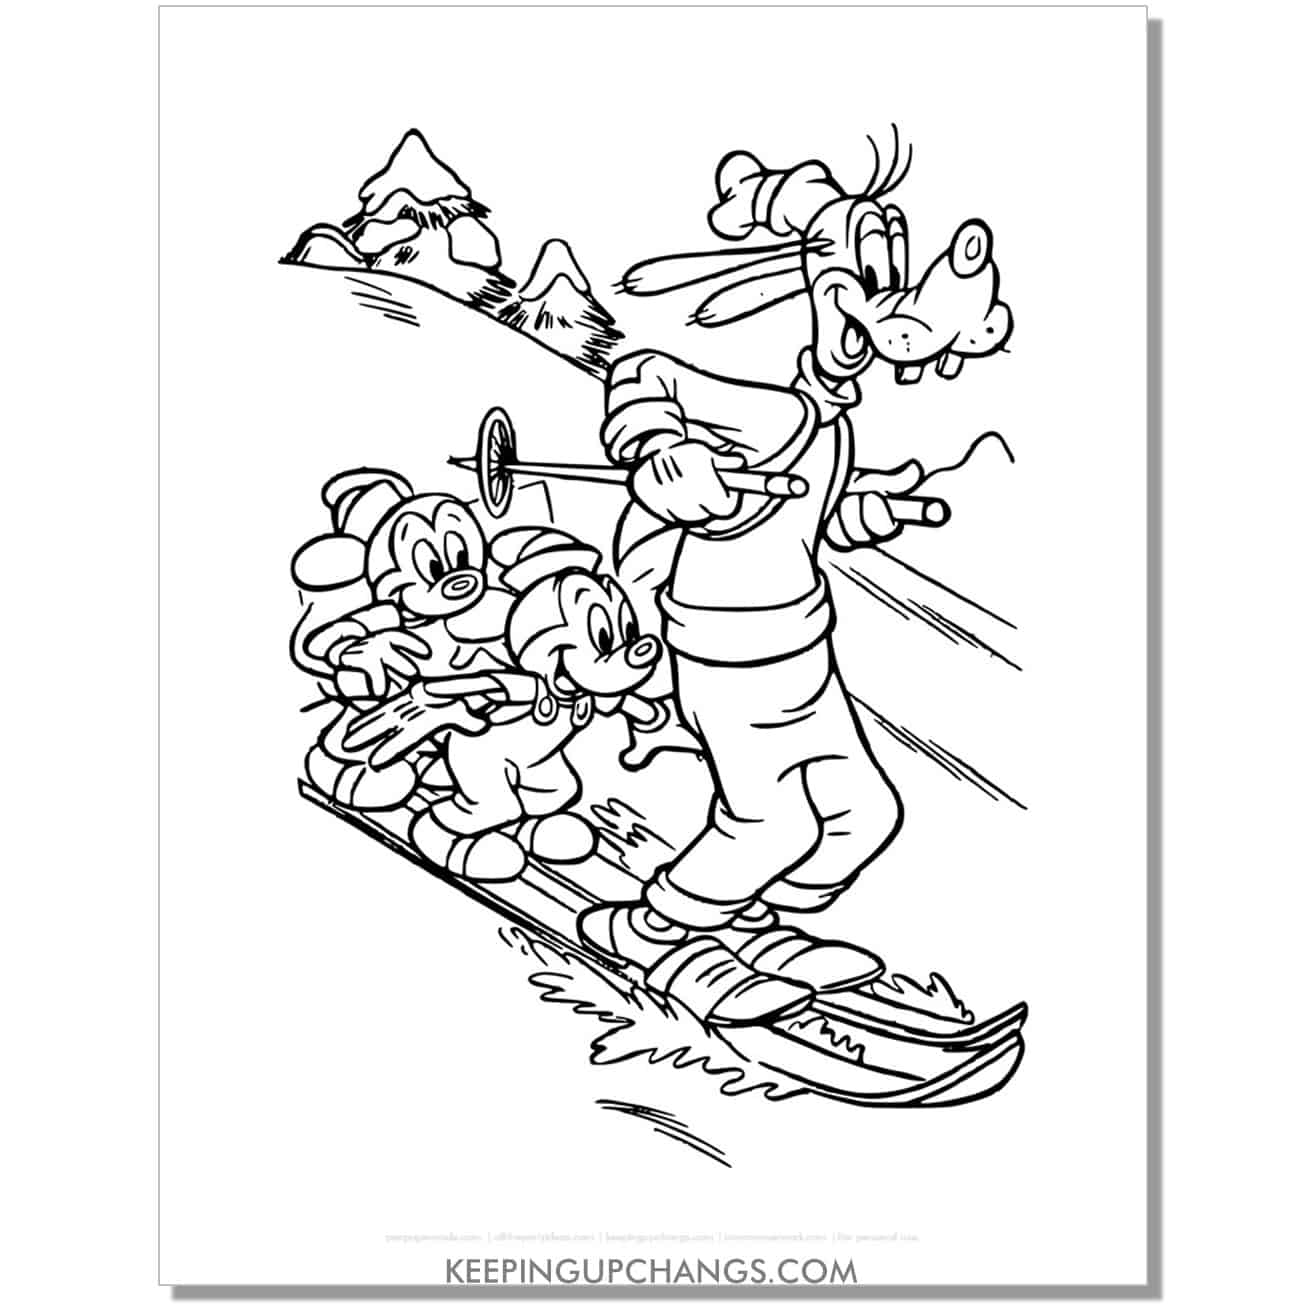 free goofy skiing down mountain with mice coloring page, sheet.